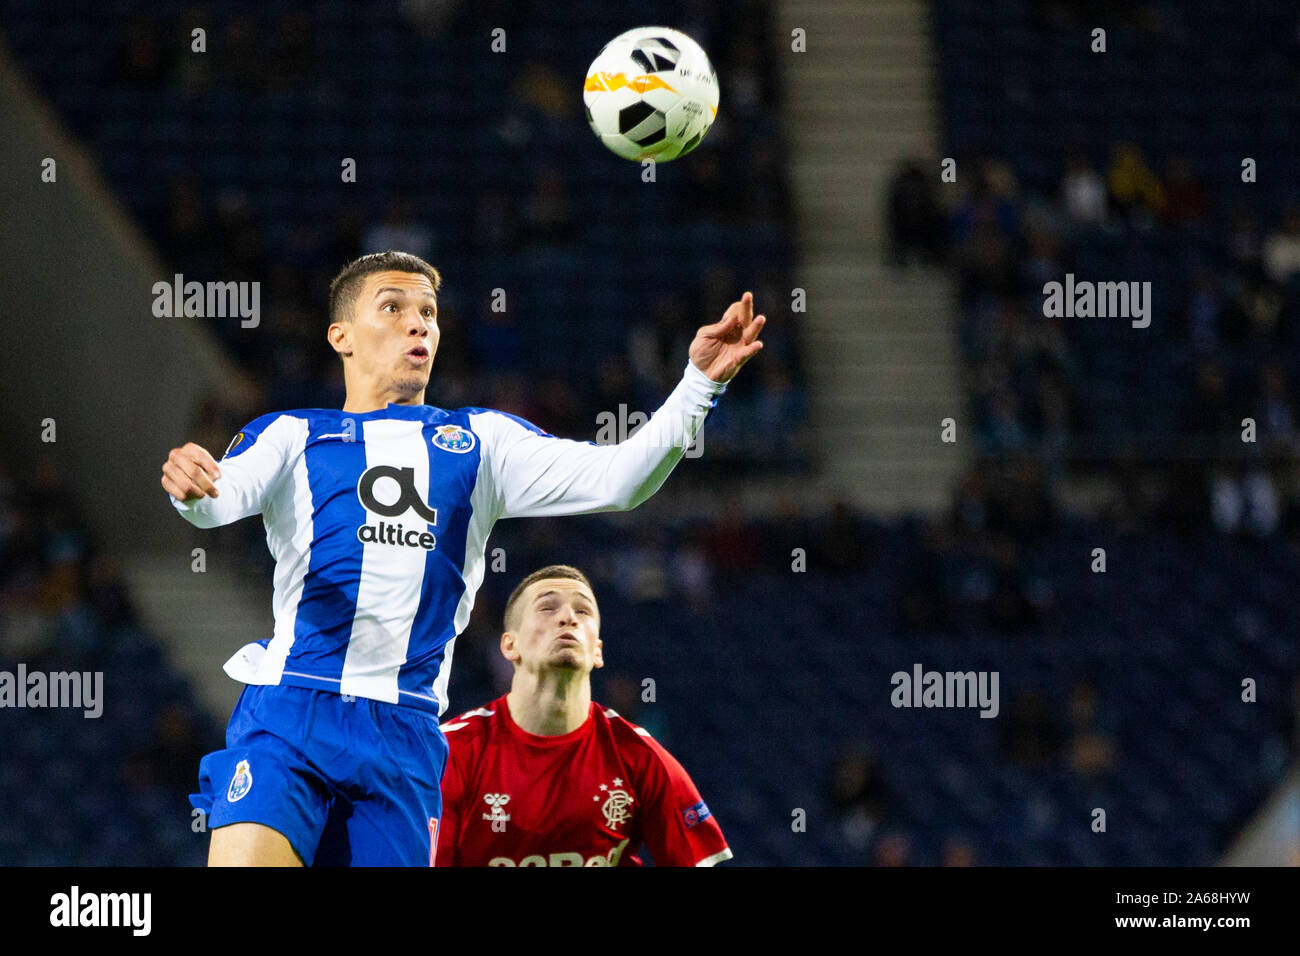 FC Porto's player, Mateus Uribe (L) and Ranger's player, Ryan Kent (R) are seen in action during the UEFA Europa League match at Dragon Stadium. (Final score: FC Porto 1:1 Rangers) Stock Photo